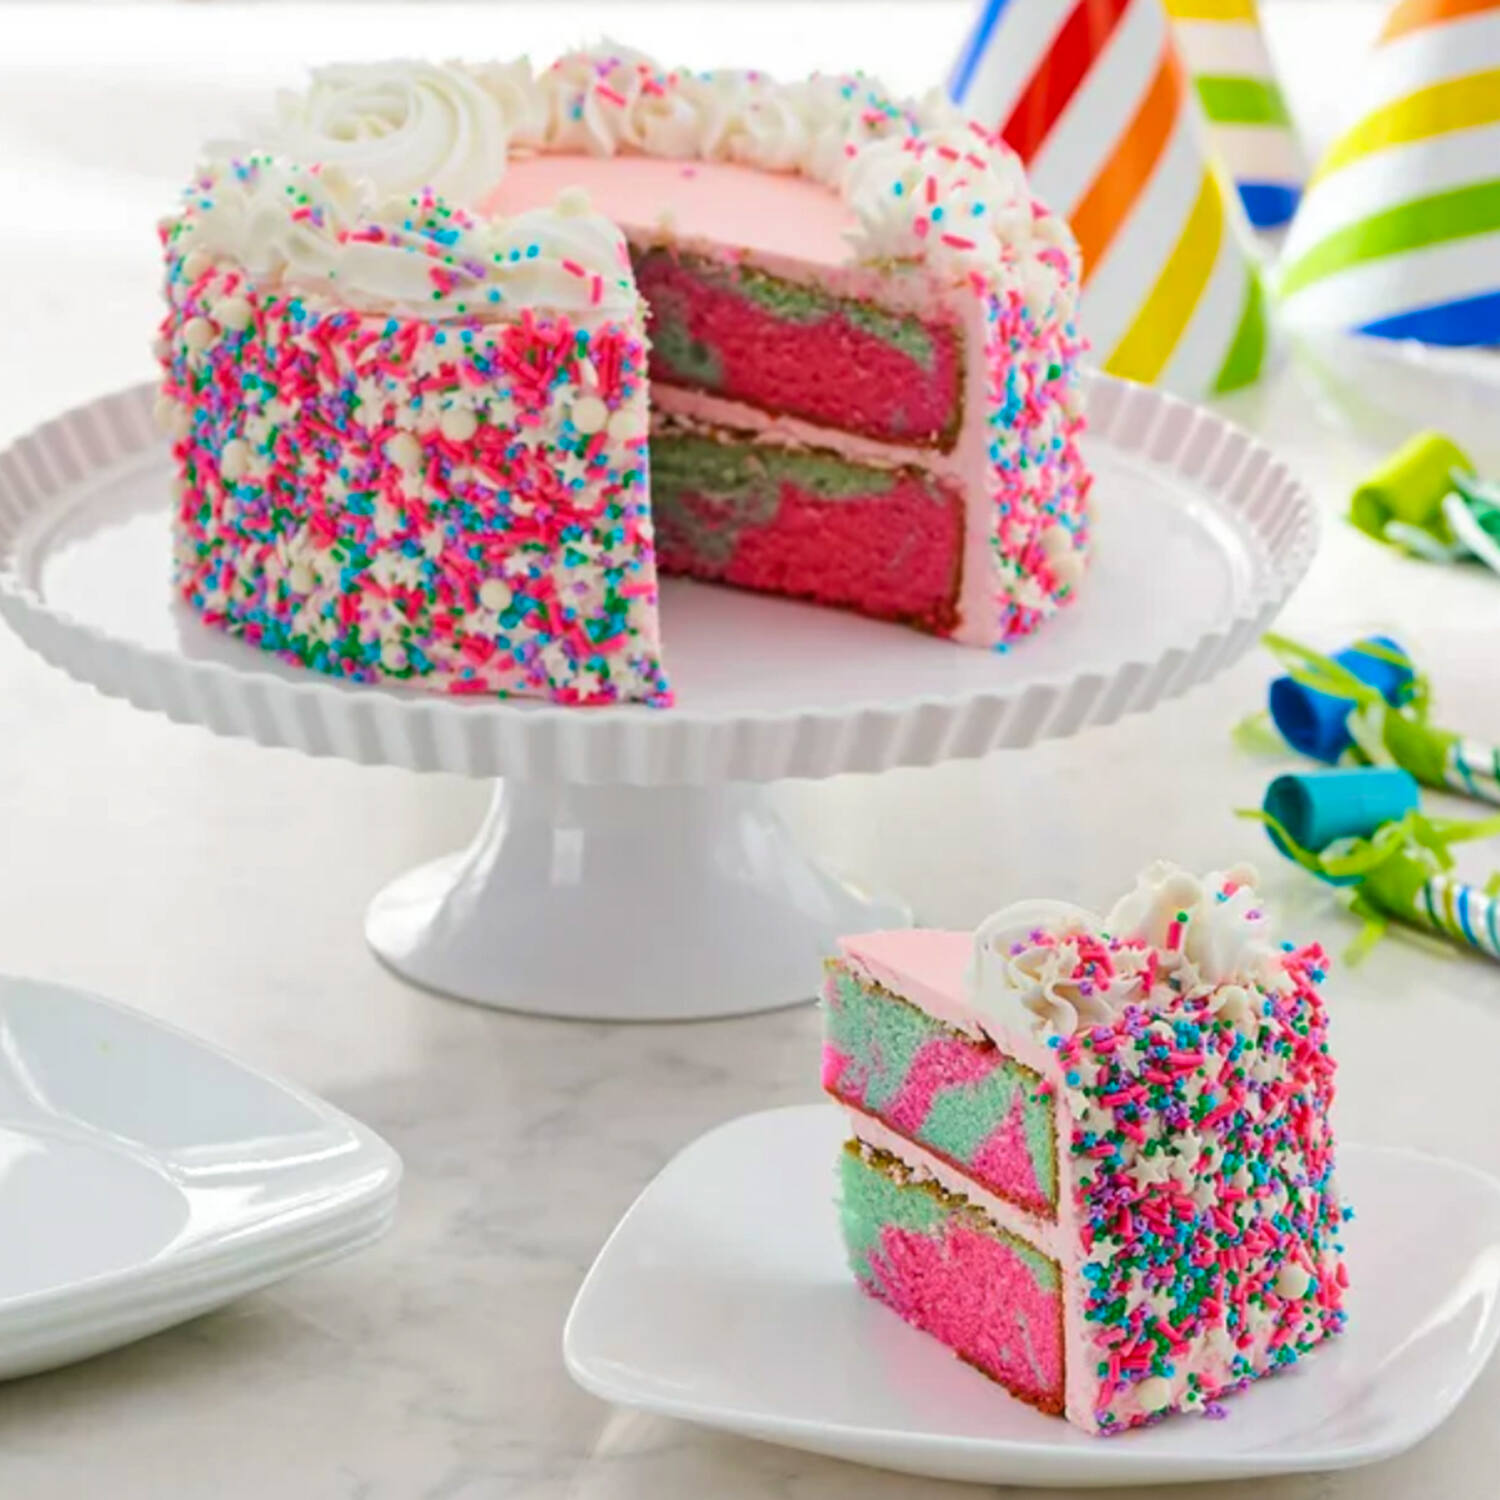 Freshness Guaranteed Color Blast Cake with Buttercreme Icing